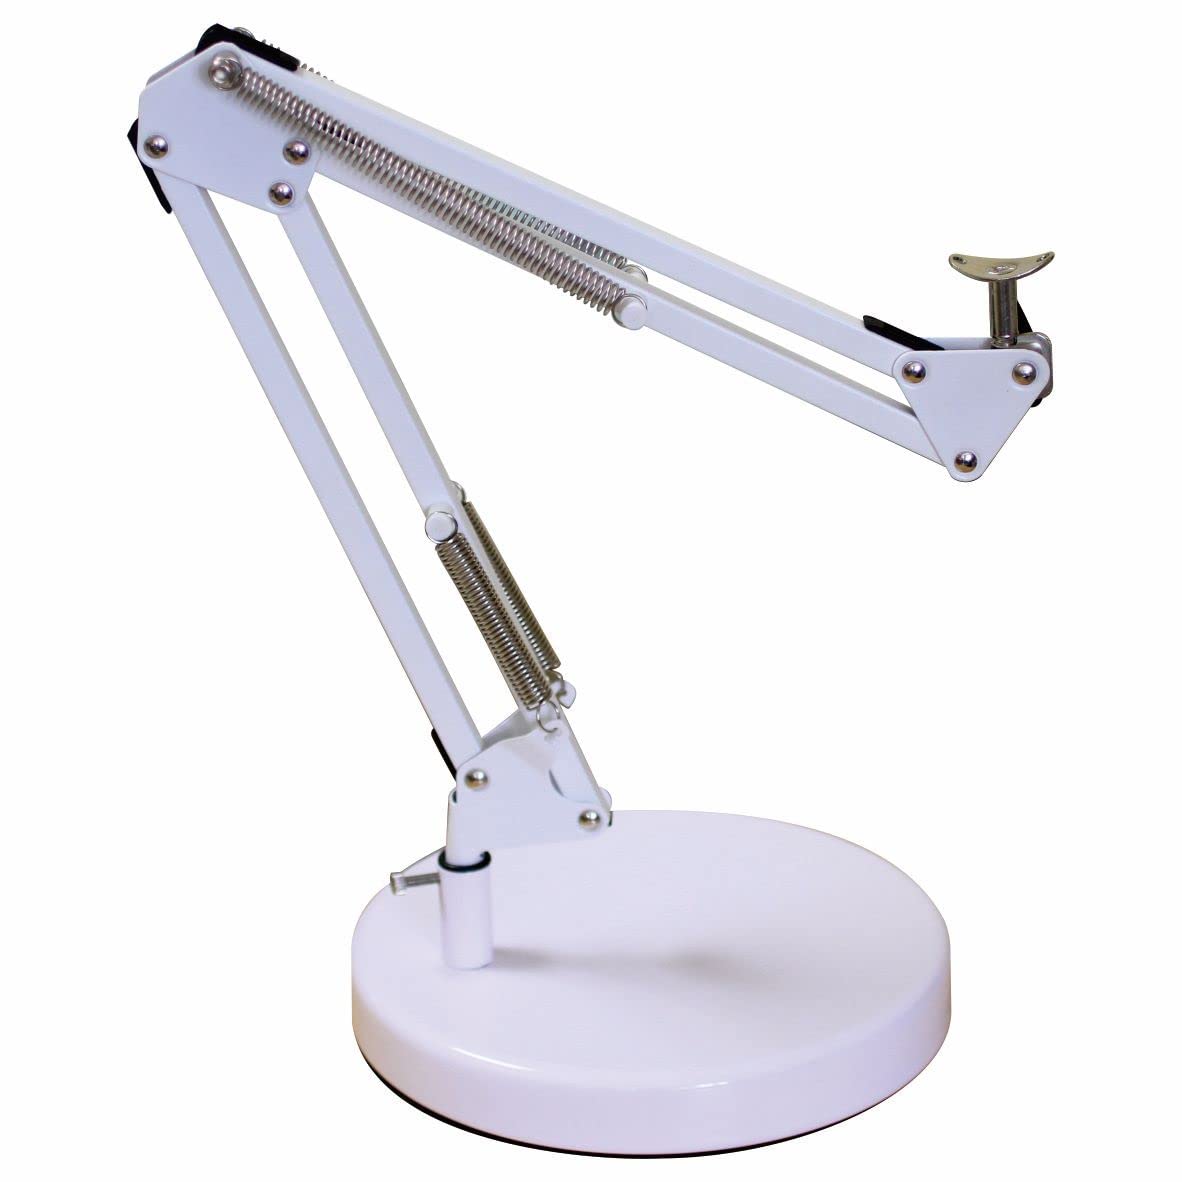 FOPATO Desk Lamp Base: Round 7.5 inches Mounting Stand for Desk Lamps,Magnifying Glass with Light,Mic Arm Desk Mount,Swing Arm Desk Lamp,for Home Office ,Compatible for lk-1 cl-2 (White)